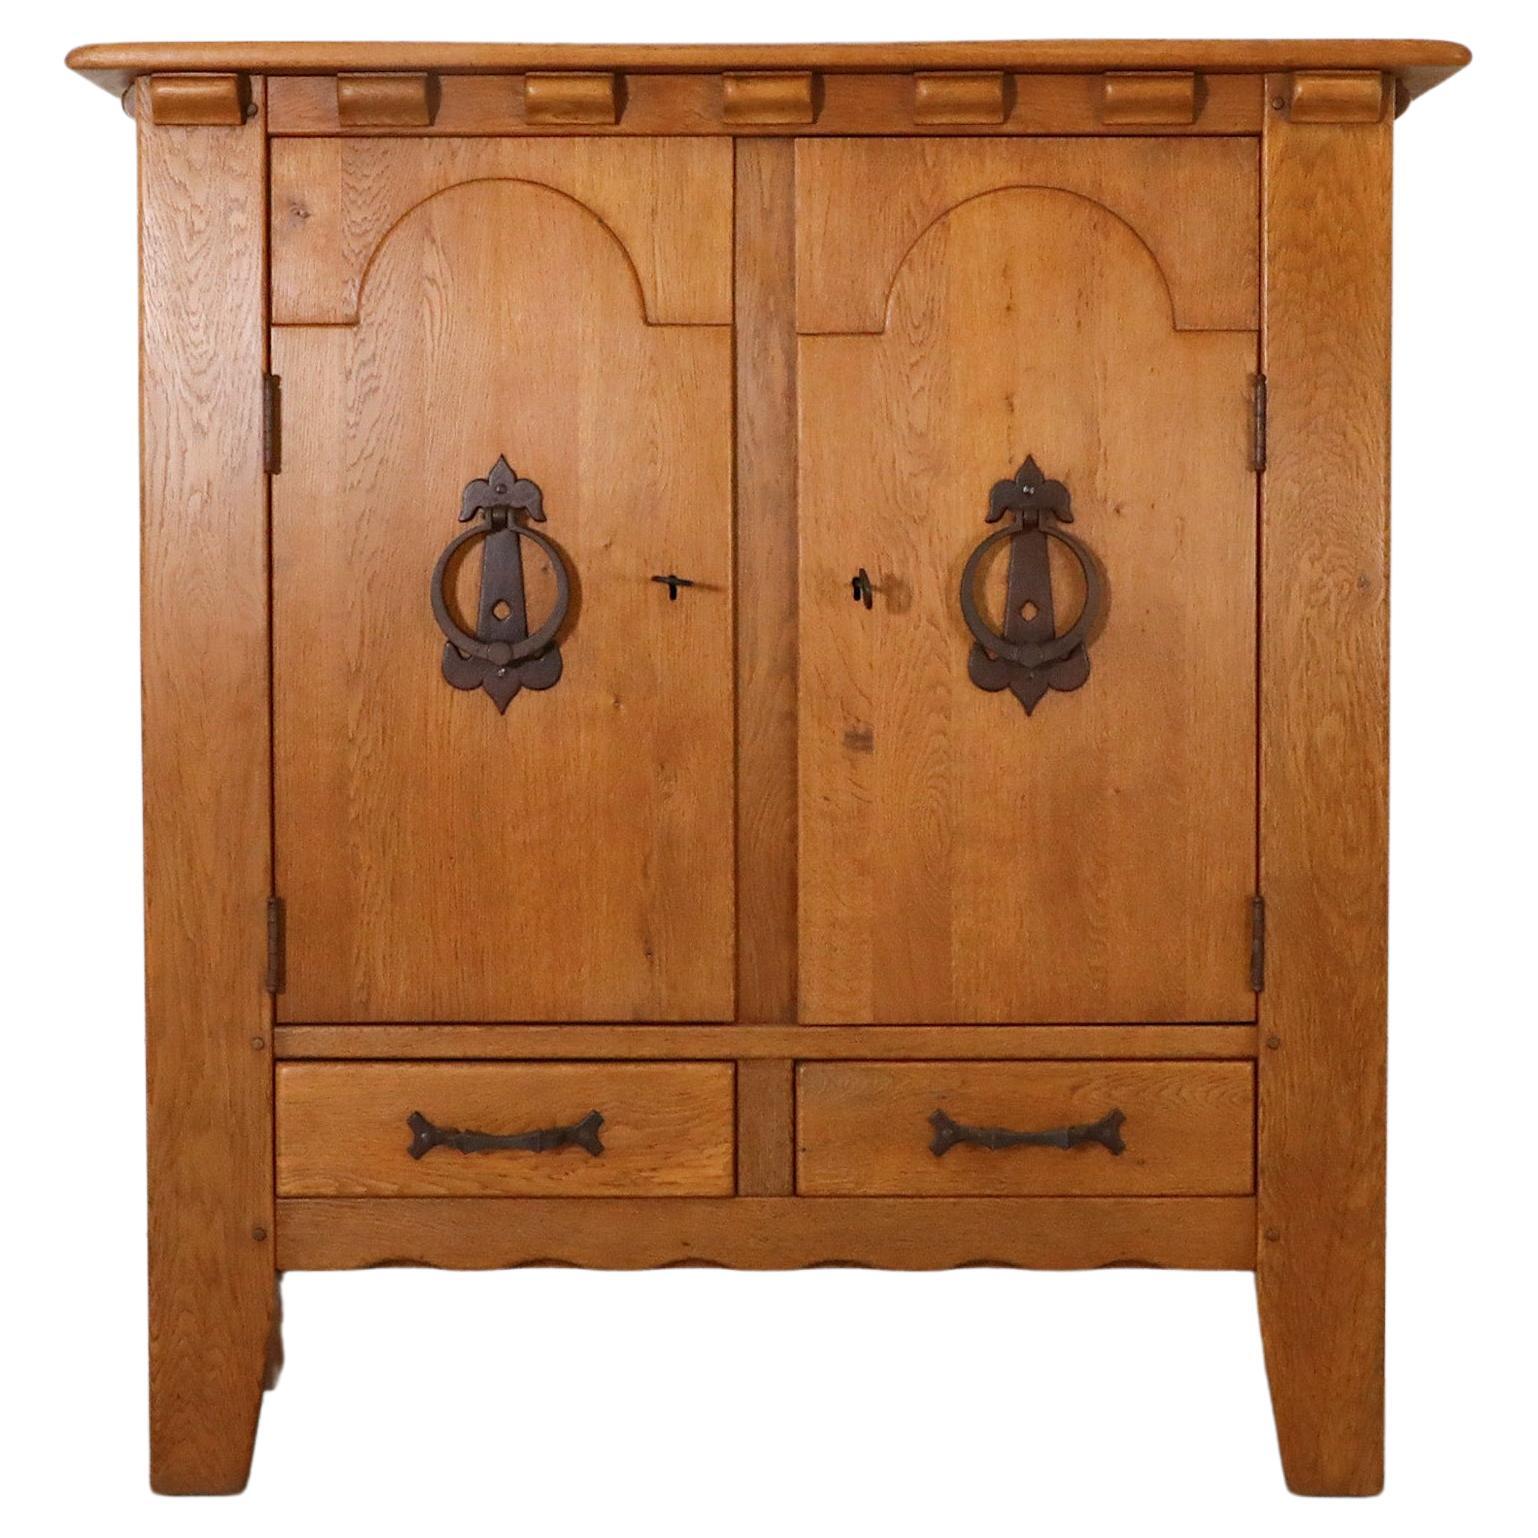 Guillerme et Chambron Inspired Brutalist Solid Oak and Iron Sideboard or Cabinet For Sale